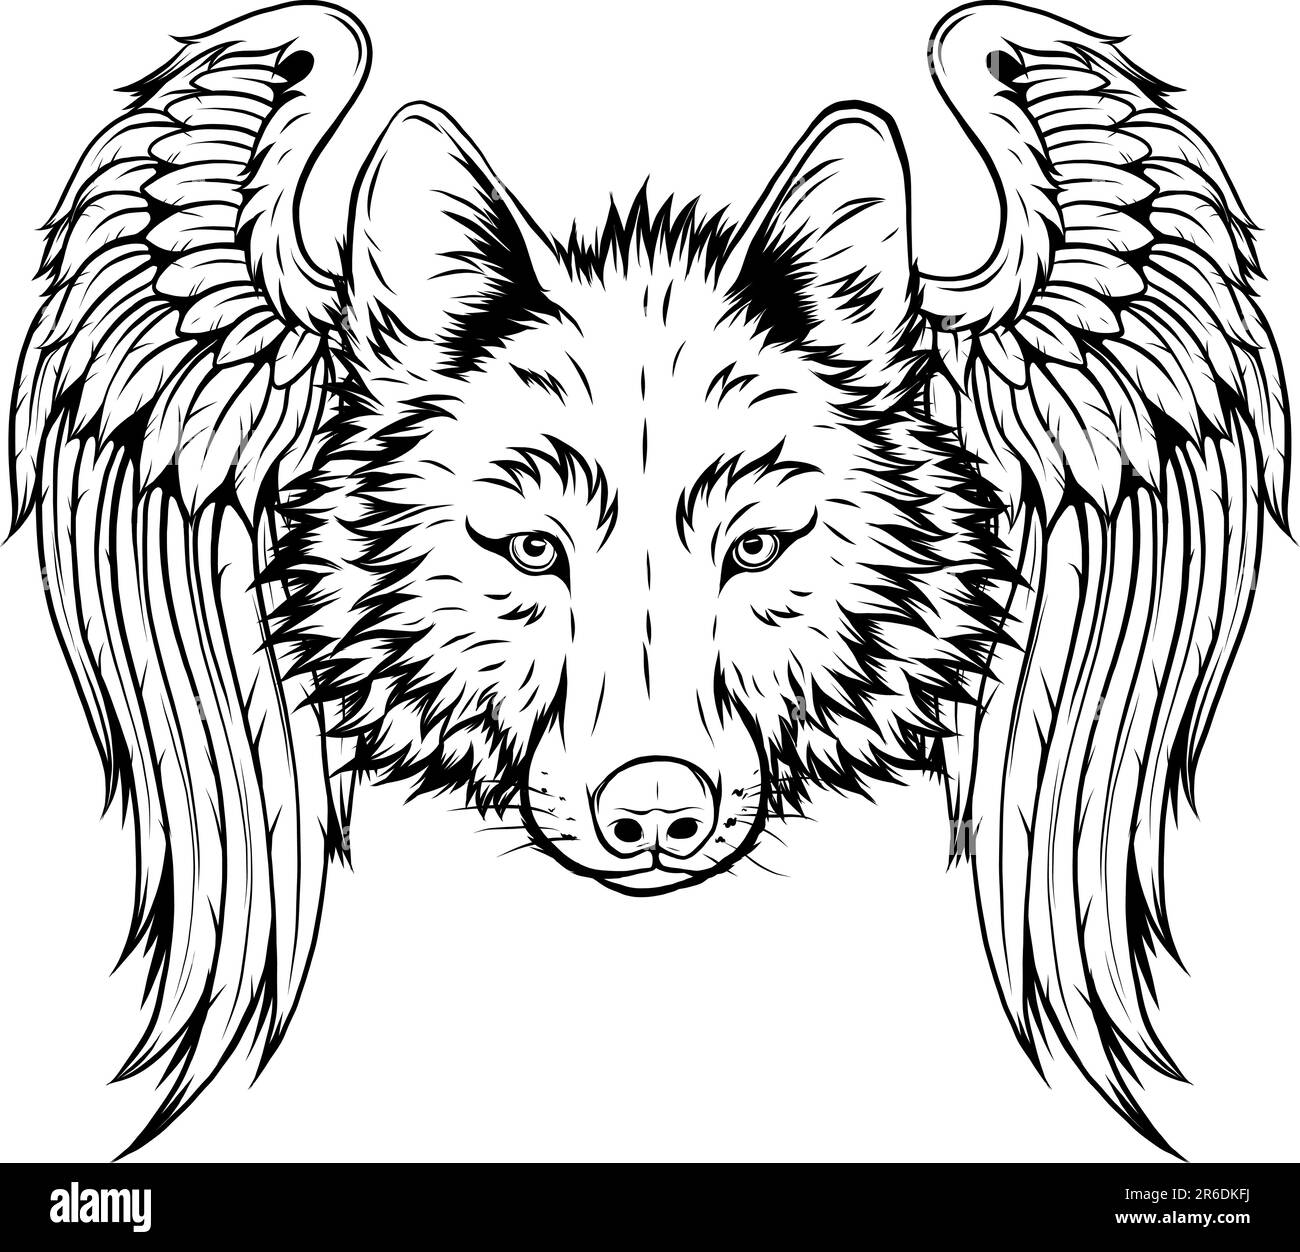 Vector illustration of monochrome wolf with wings stock vector image art